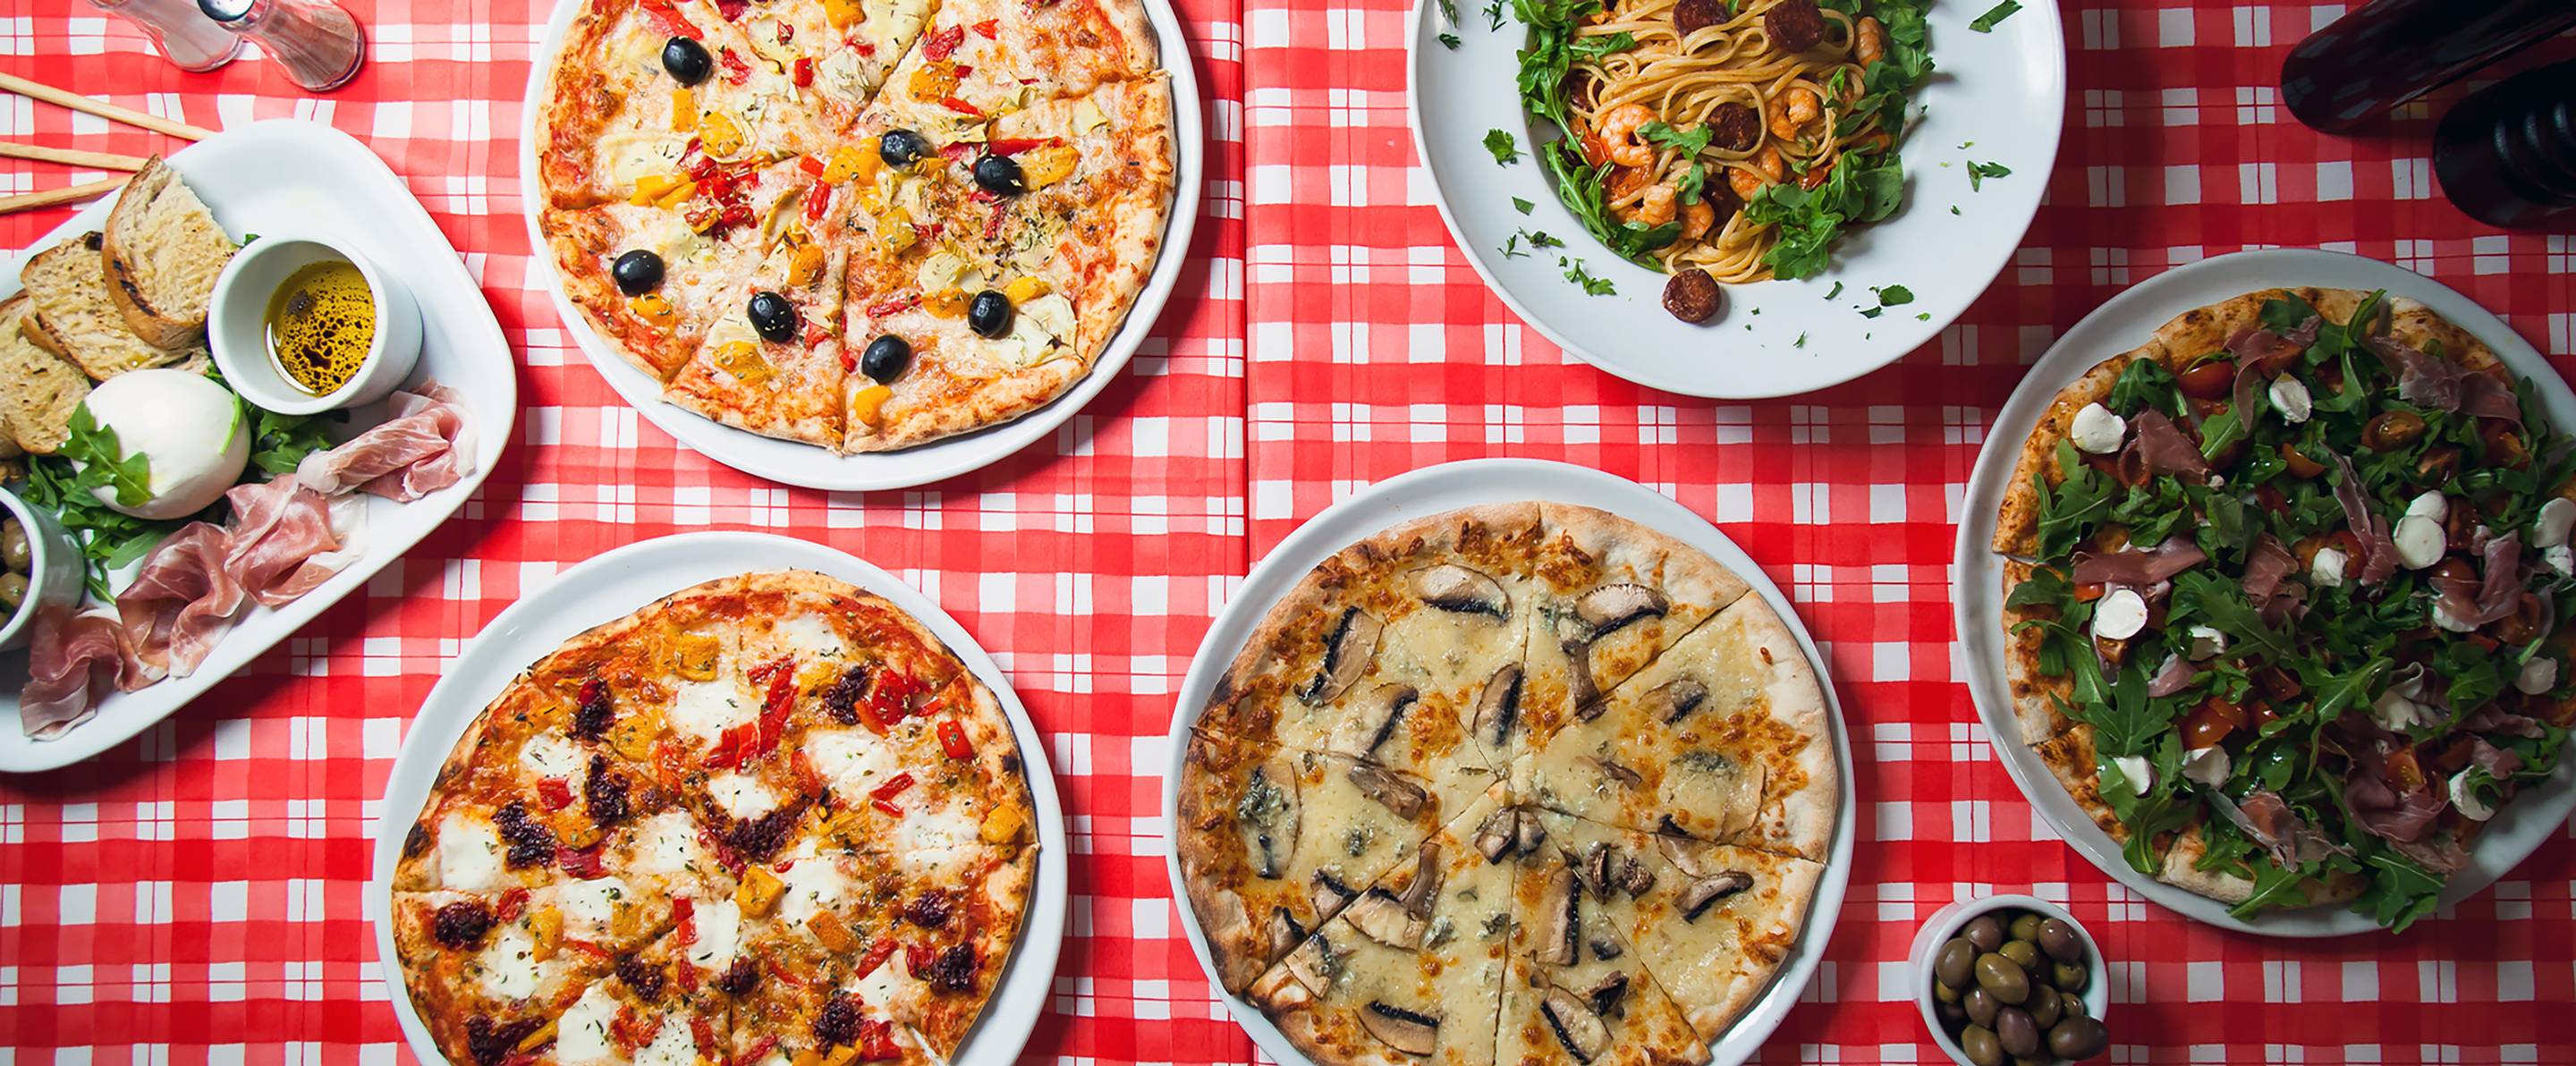 Order Pizza & Wings Online, Delivery, Takeout or Dine-In